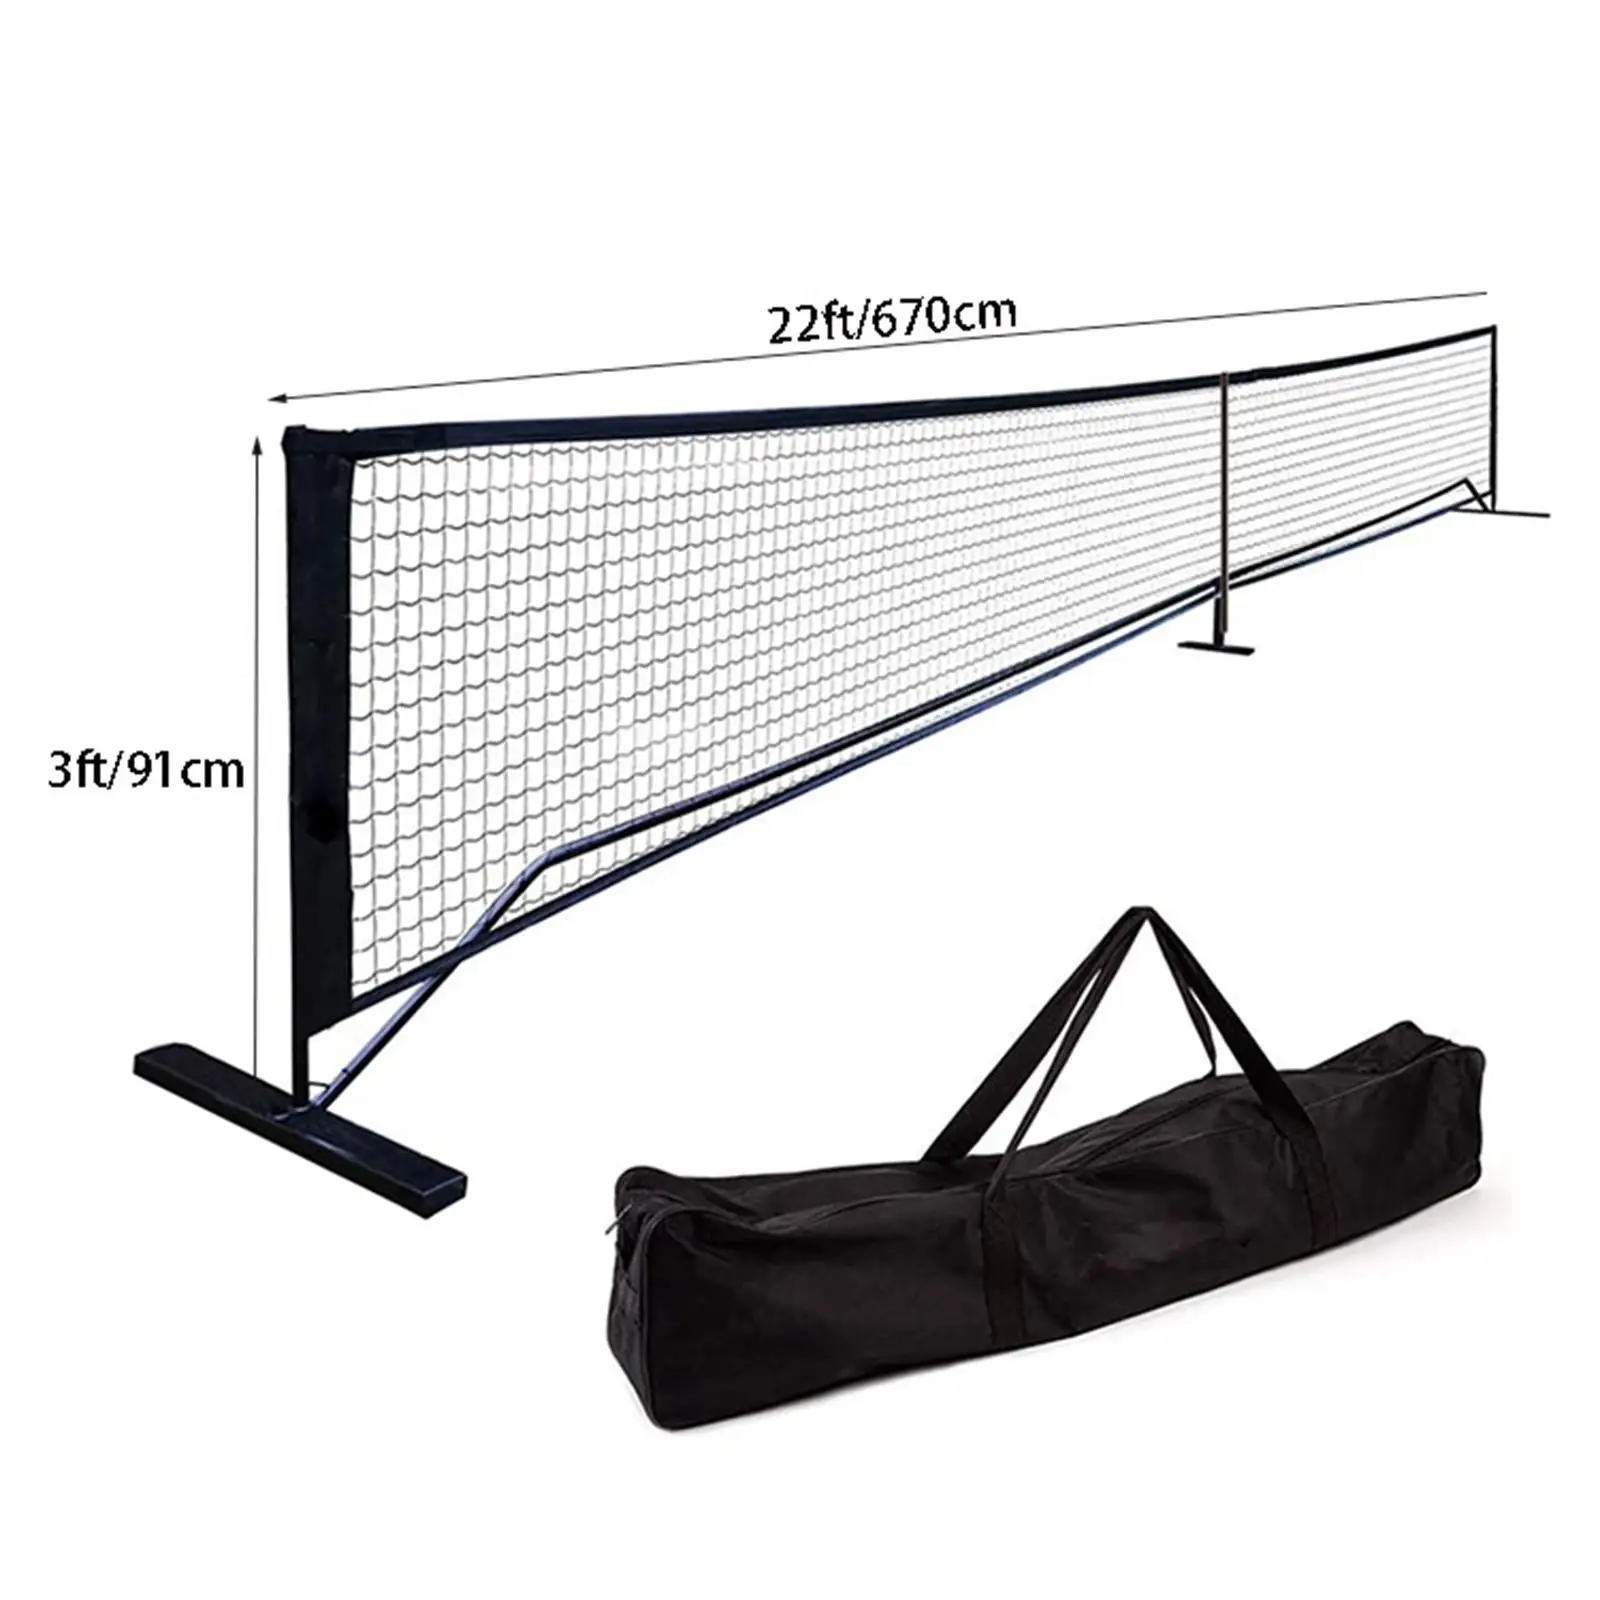 Portable Pickleball Net Set Black 670cmx91cm Backyards Beginners Game Iron Frame with Storage Bag Professionals Driveway Matches